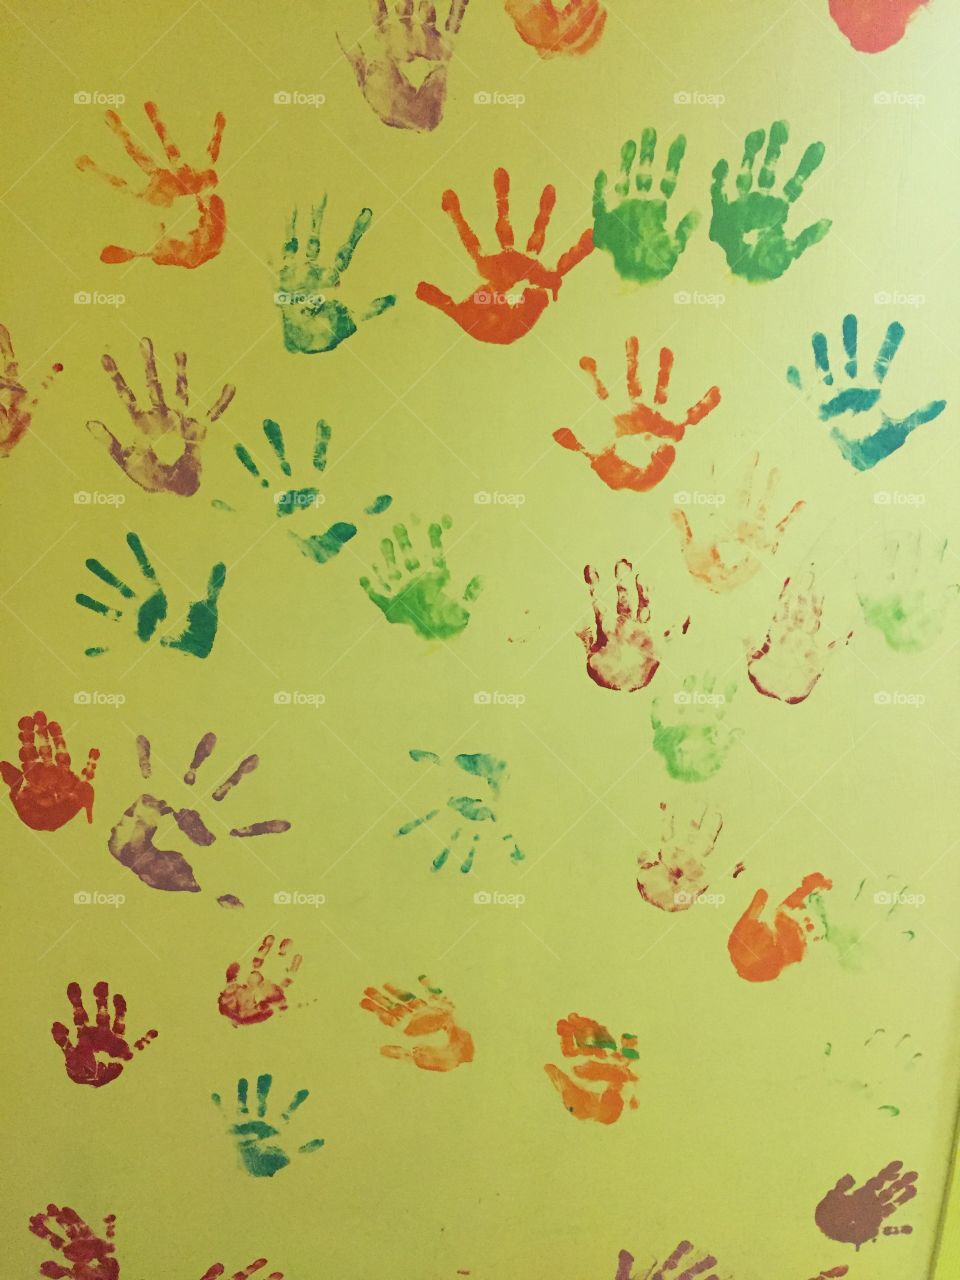 Hand prints from cancer patients at Cagayan Valley Medical Center Pediatric Ward. Funds raised from this photo will be donated to the Cancer Patients in Cagayan Organization for Kids. 